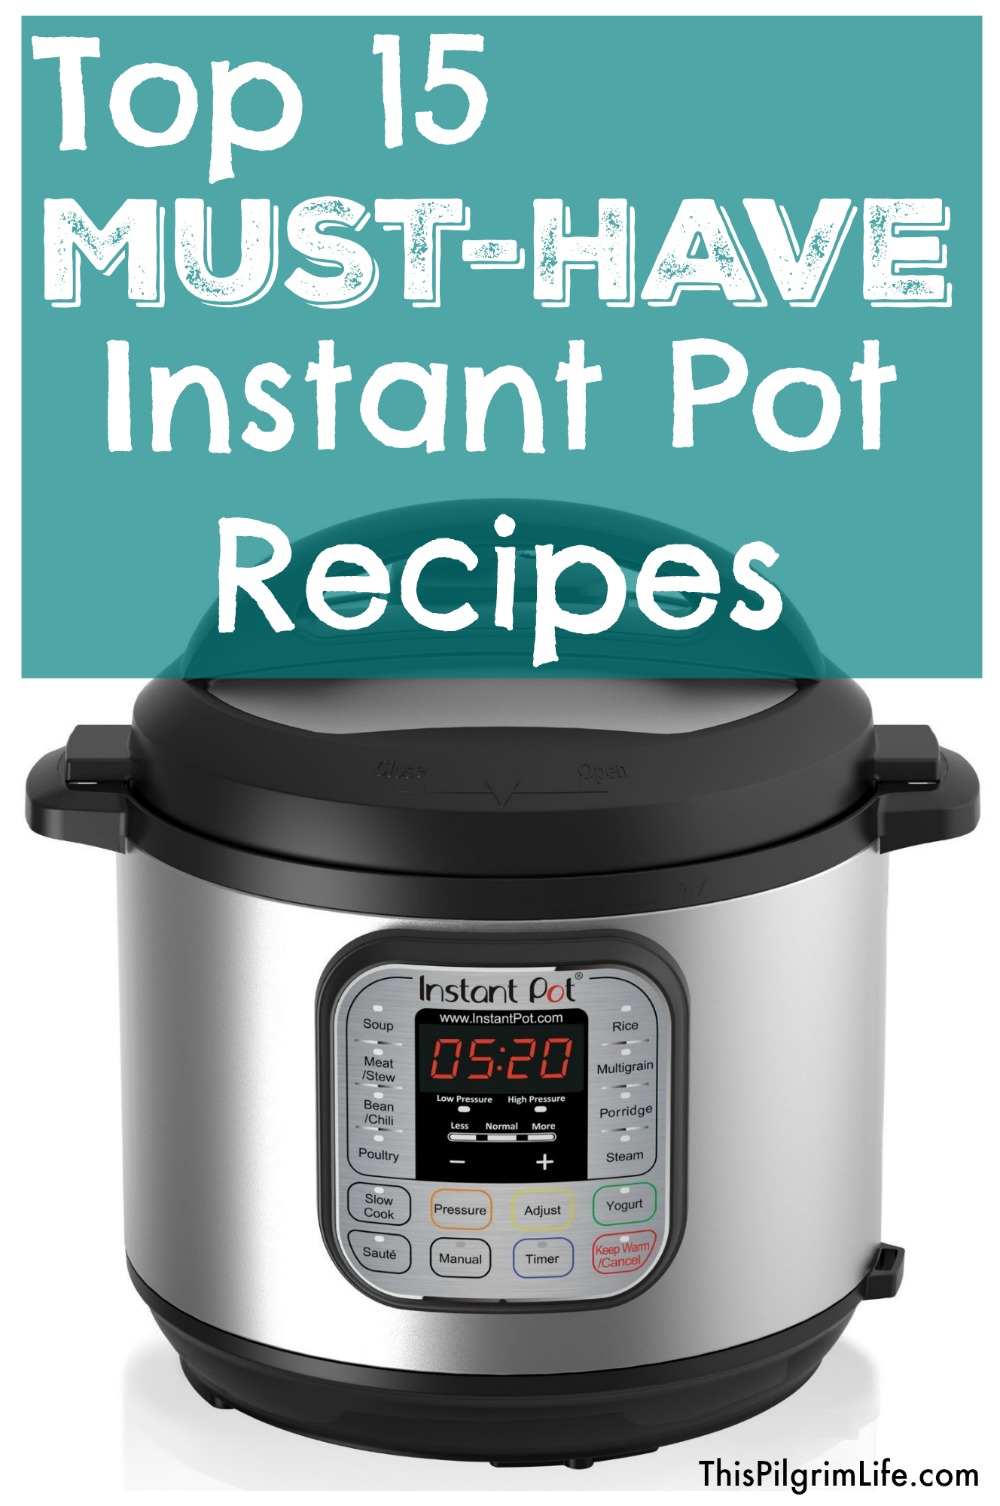 Whether you are a new Instant Pot owner or have been using one for a while, this list of the top 15 must-have Instant Pot recipes is for YOU! Keep reading for tips, recipes, and an AWESOME, FREE printable! 